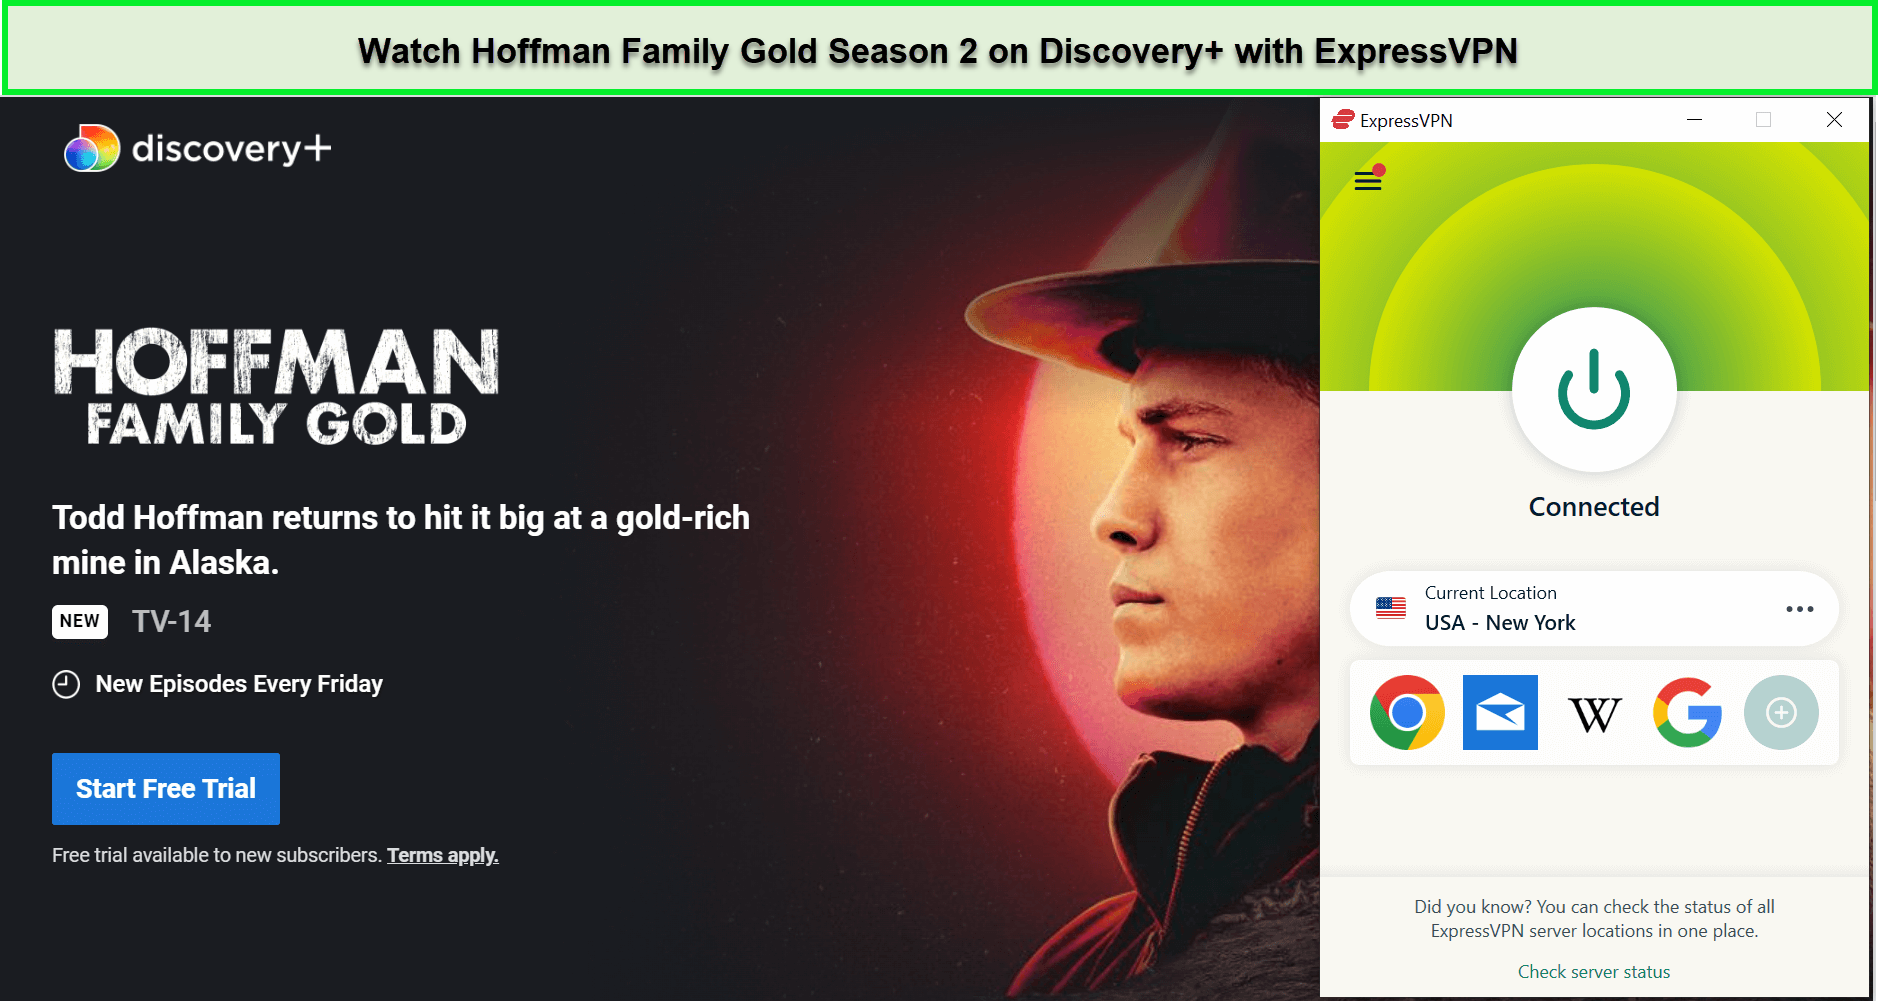 Watch-Hoffman-Family-Gold-Season-2-in-ae-on-Discovery-with-ExpressVPN.